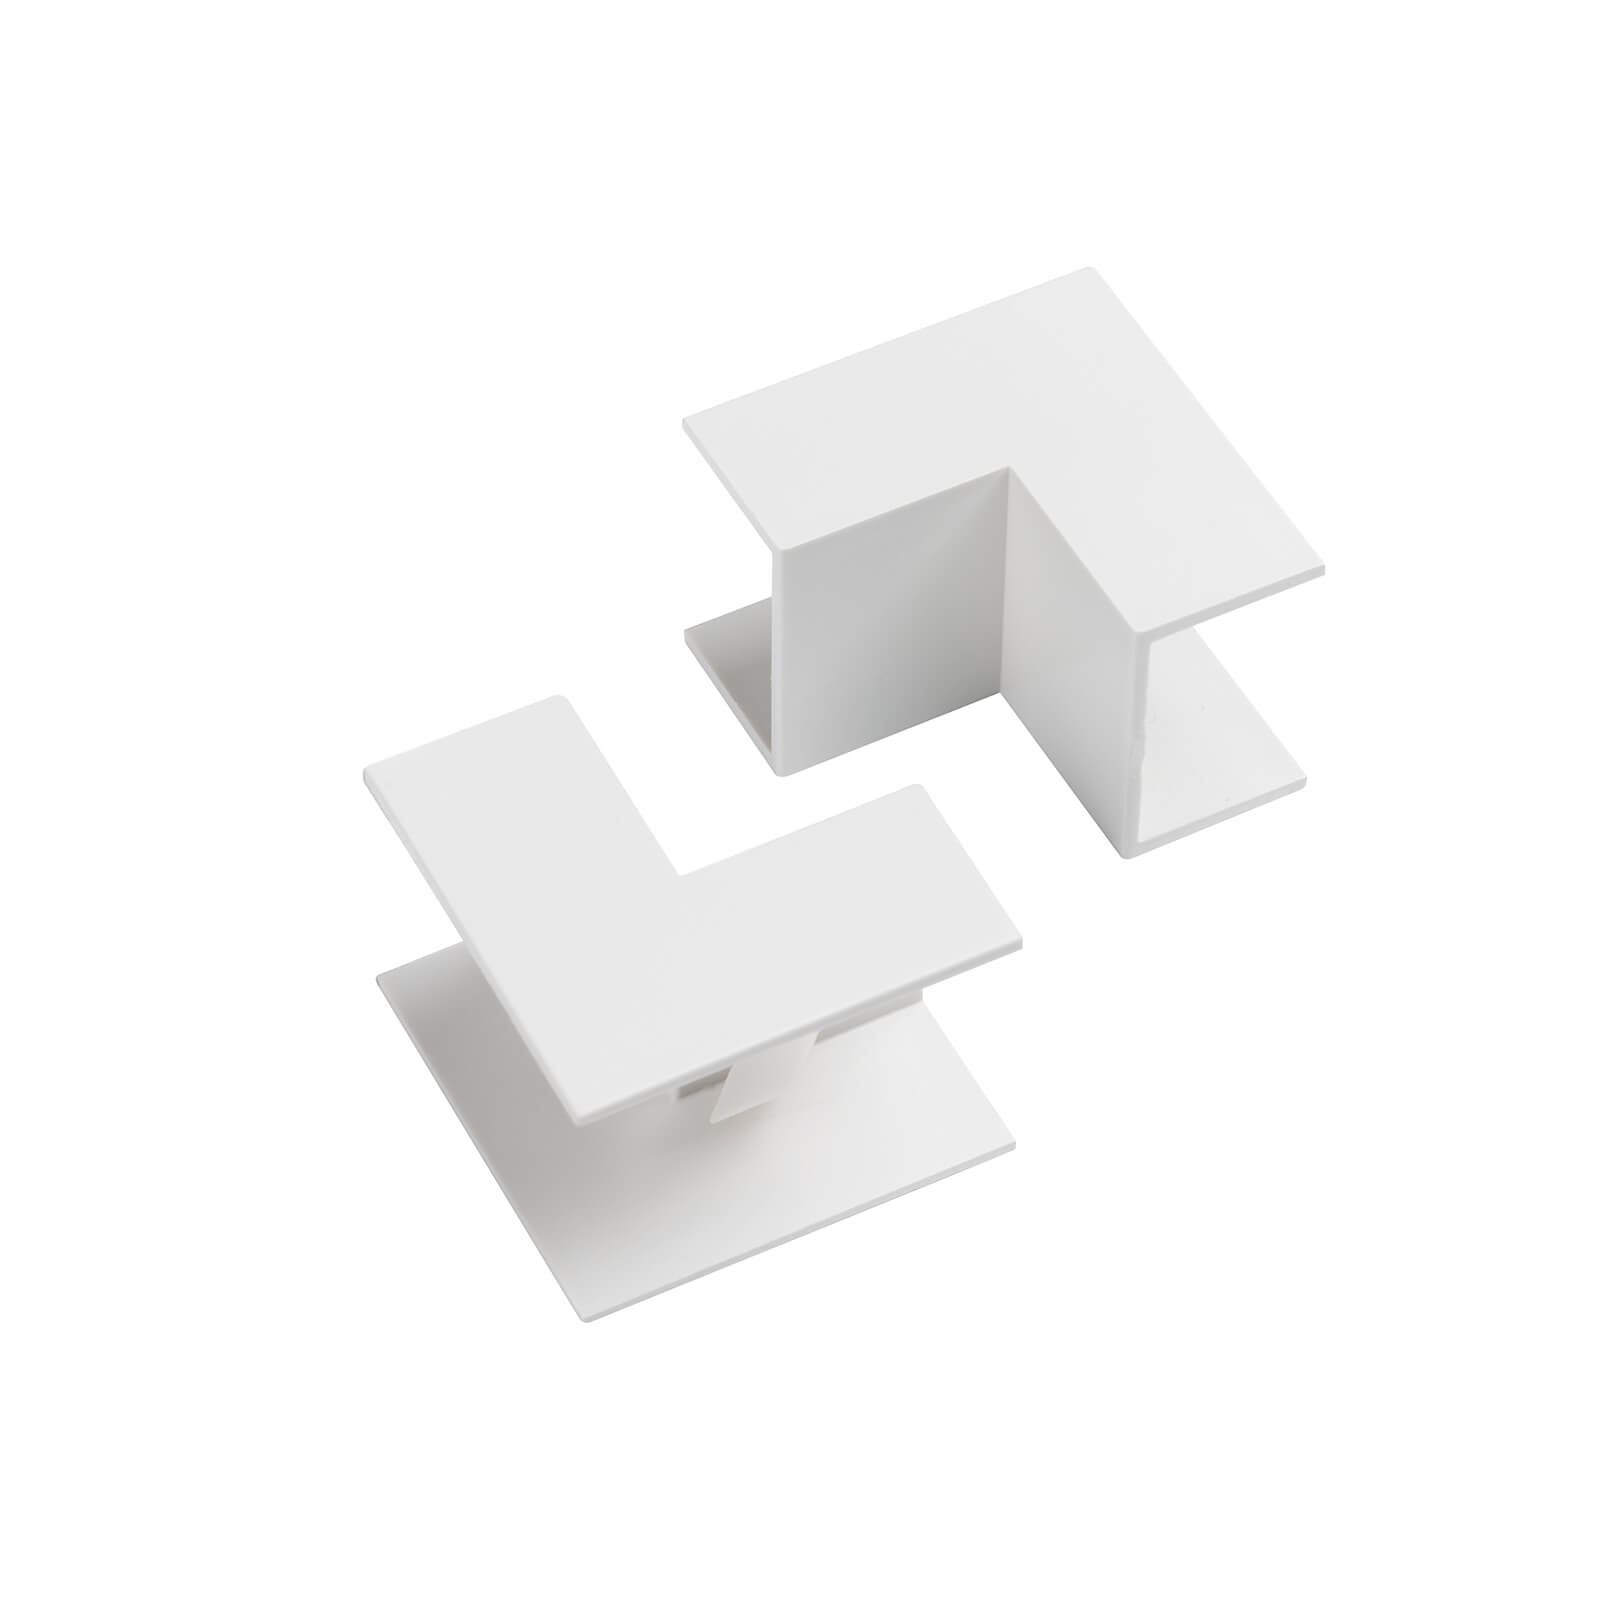 Photo of D-line 25x16mm Trunking Clip-on Internal Bend 2 Pack - White